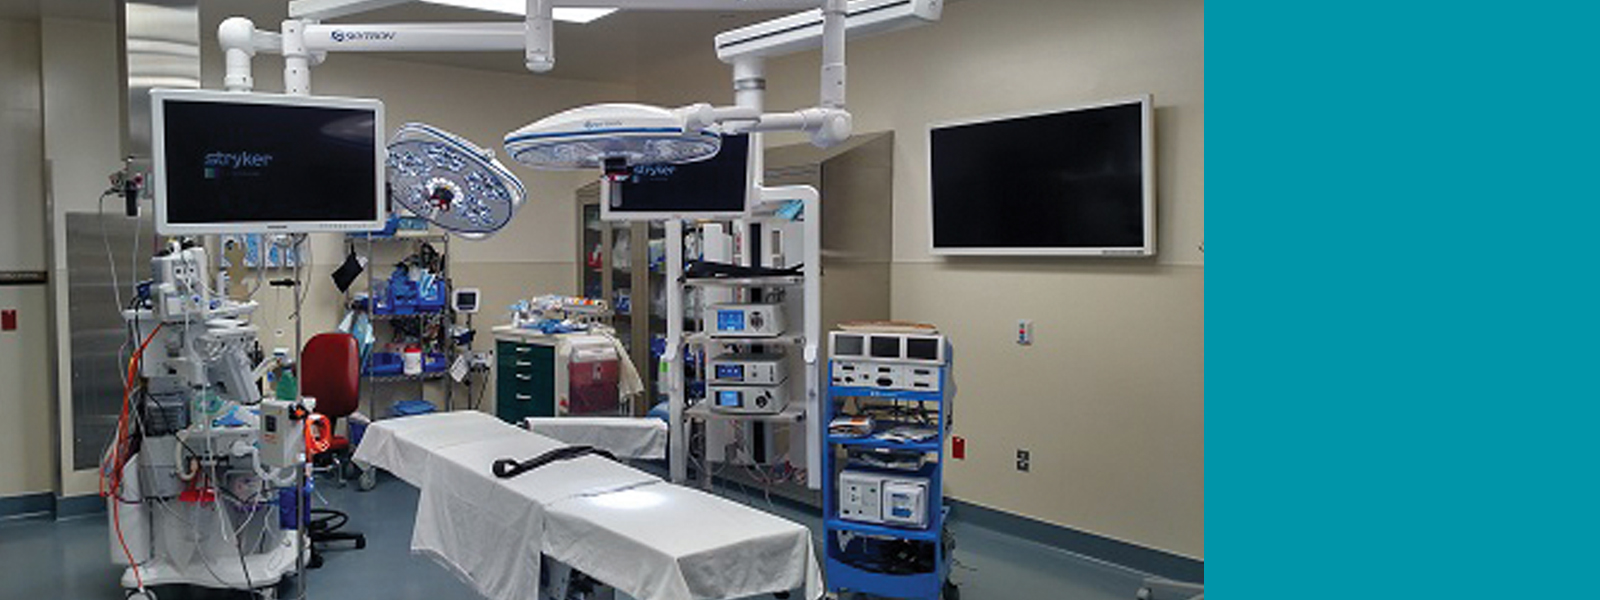 Prowers Medical Center operating room with a television to allow for telemedicine consultations